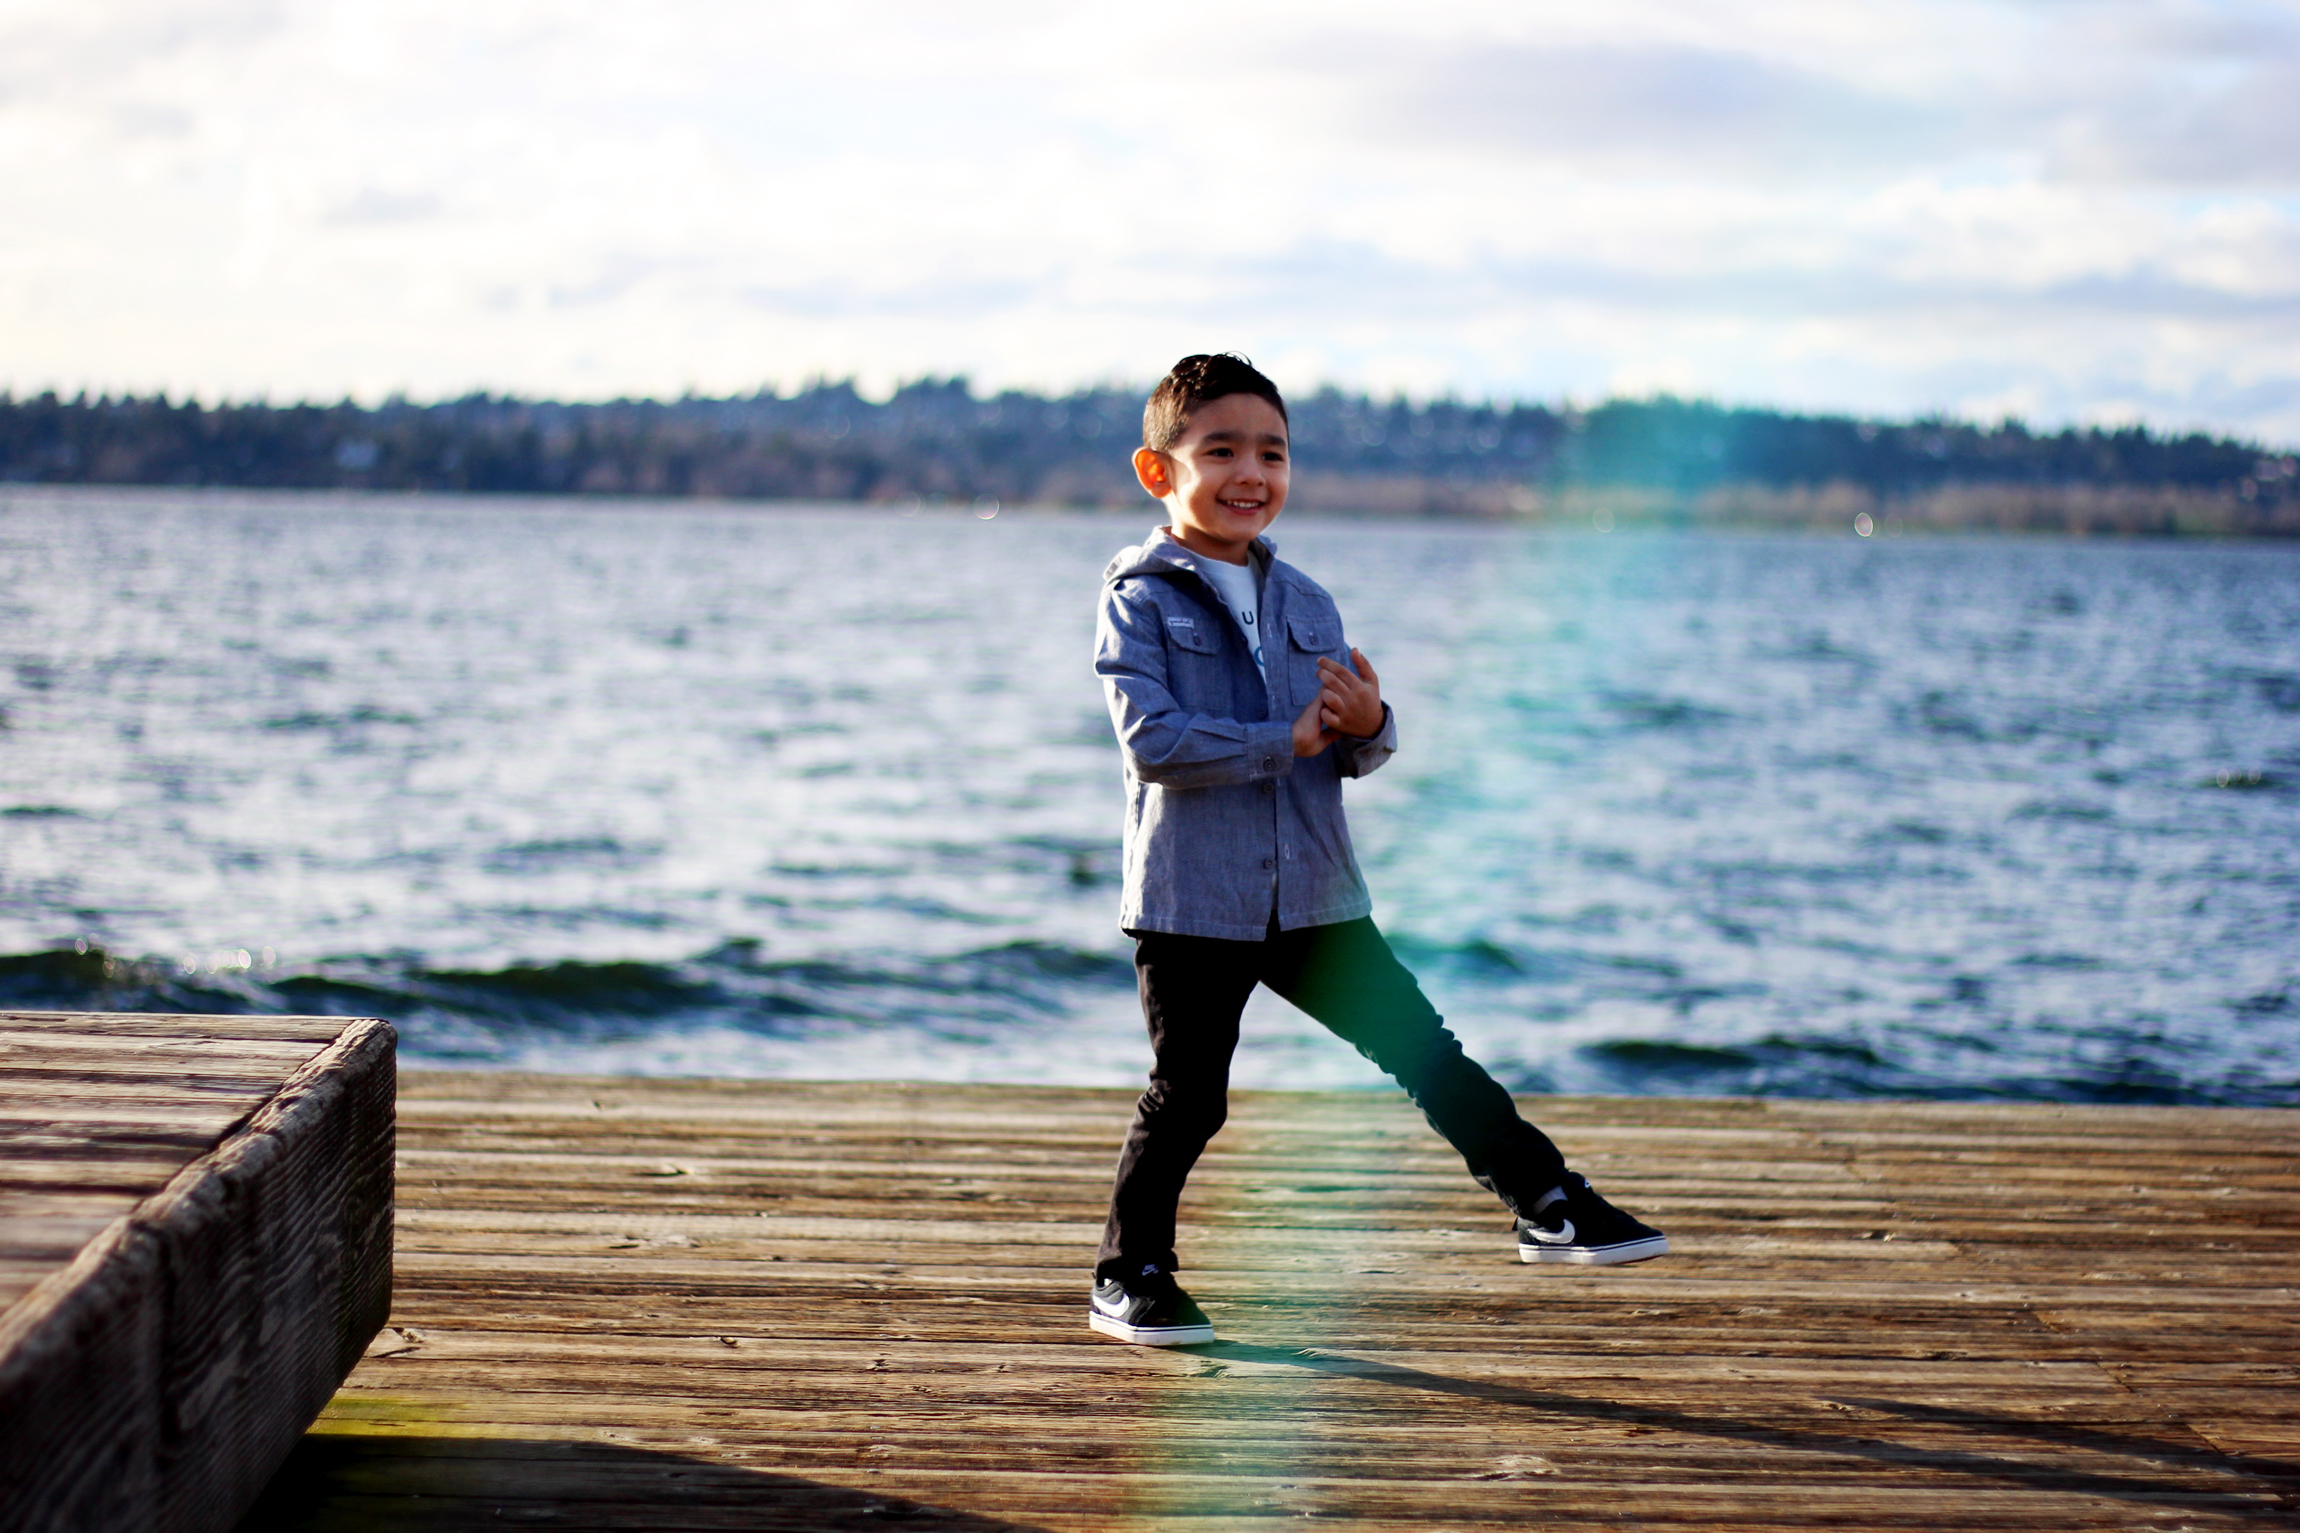 KID STYLE: SUNSET ON THE DOCKS — All Kids Are Gifted